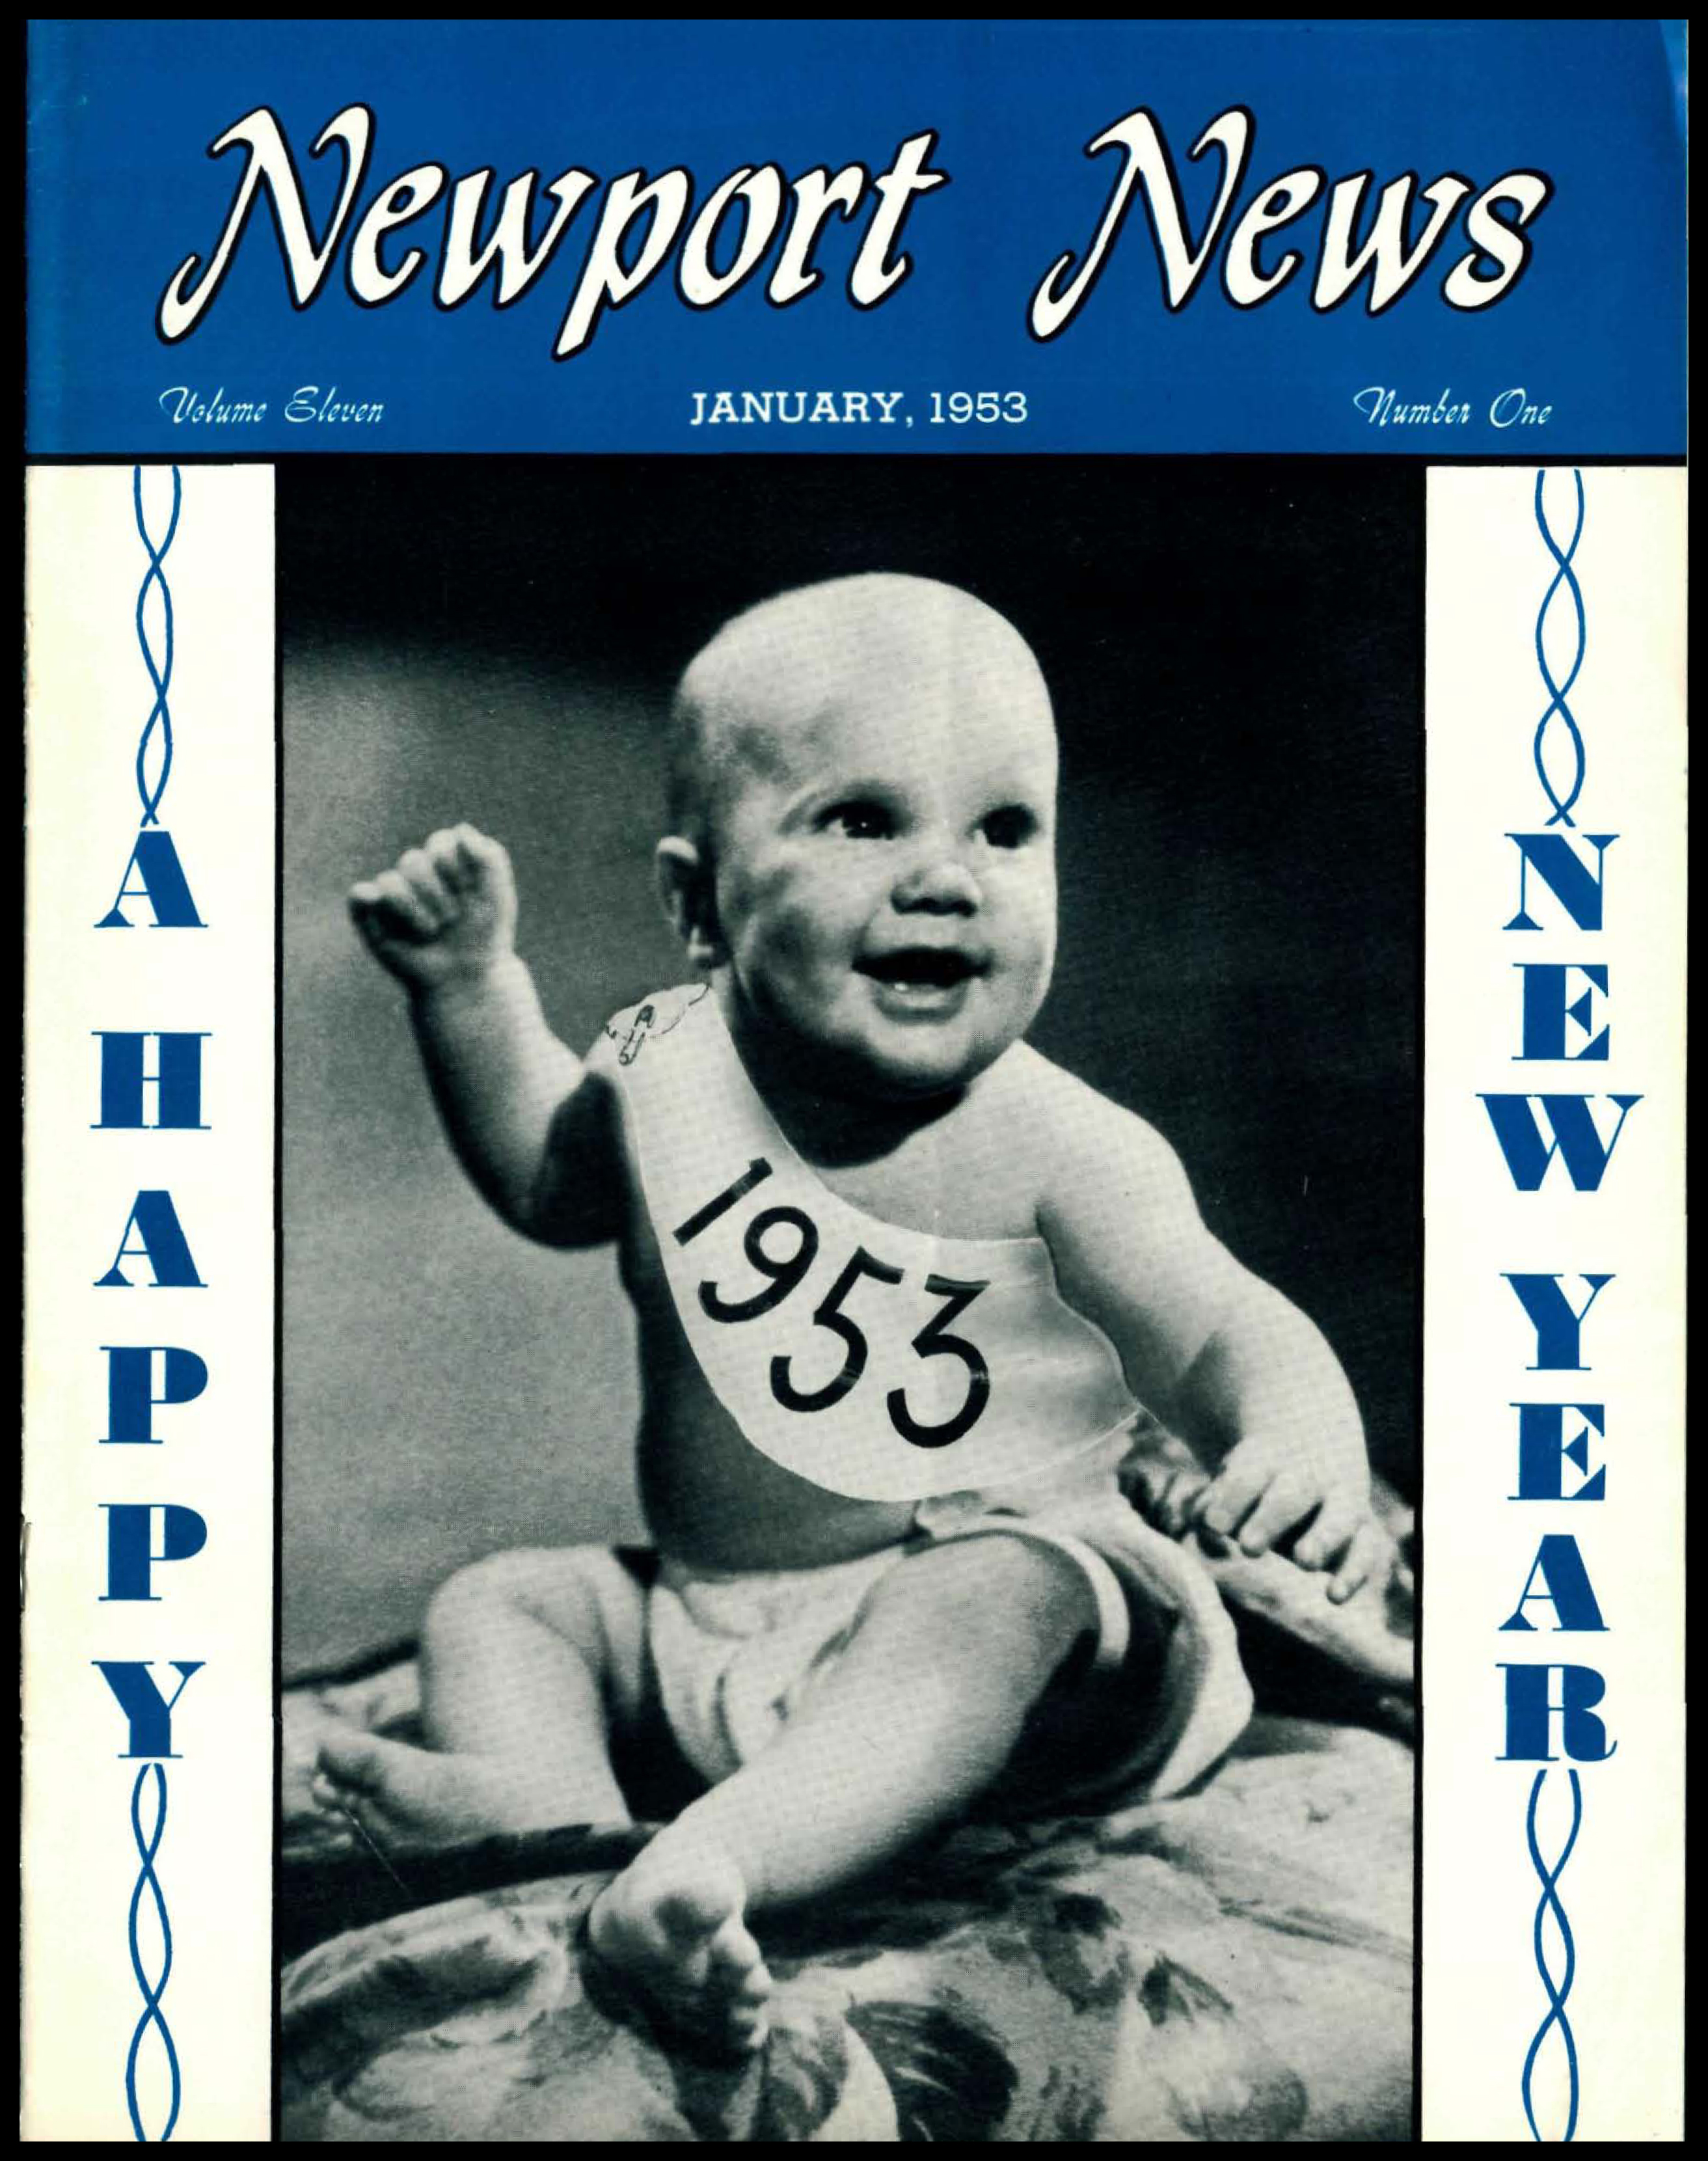 Cover of Newport News with a photo of a baby wearing a "1953" sash and the message "Happy New Year"